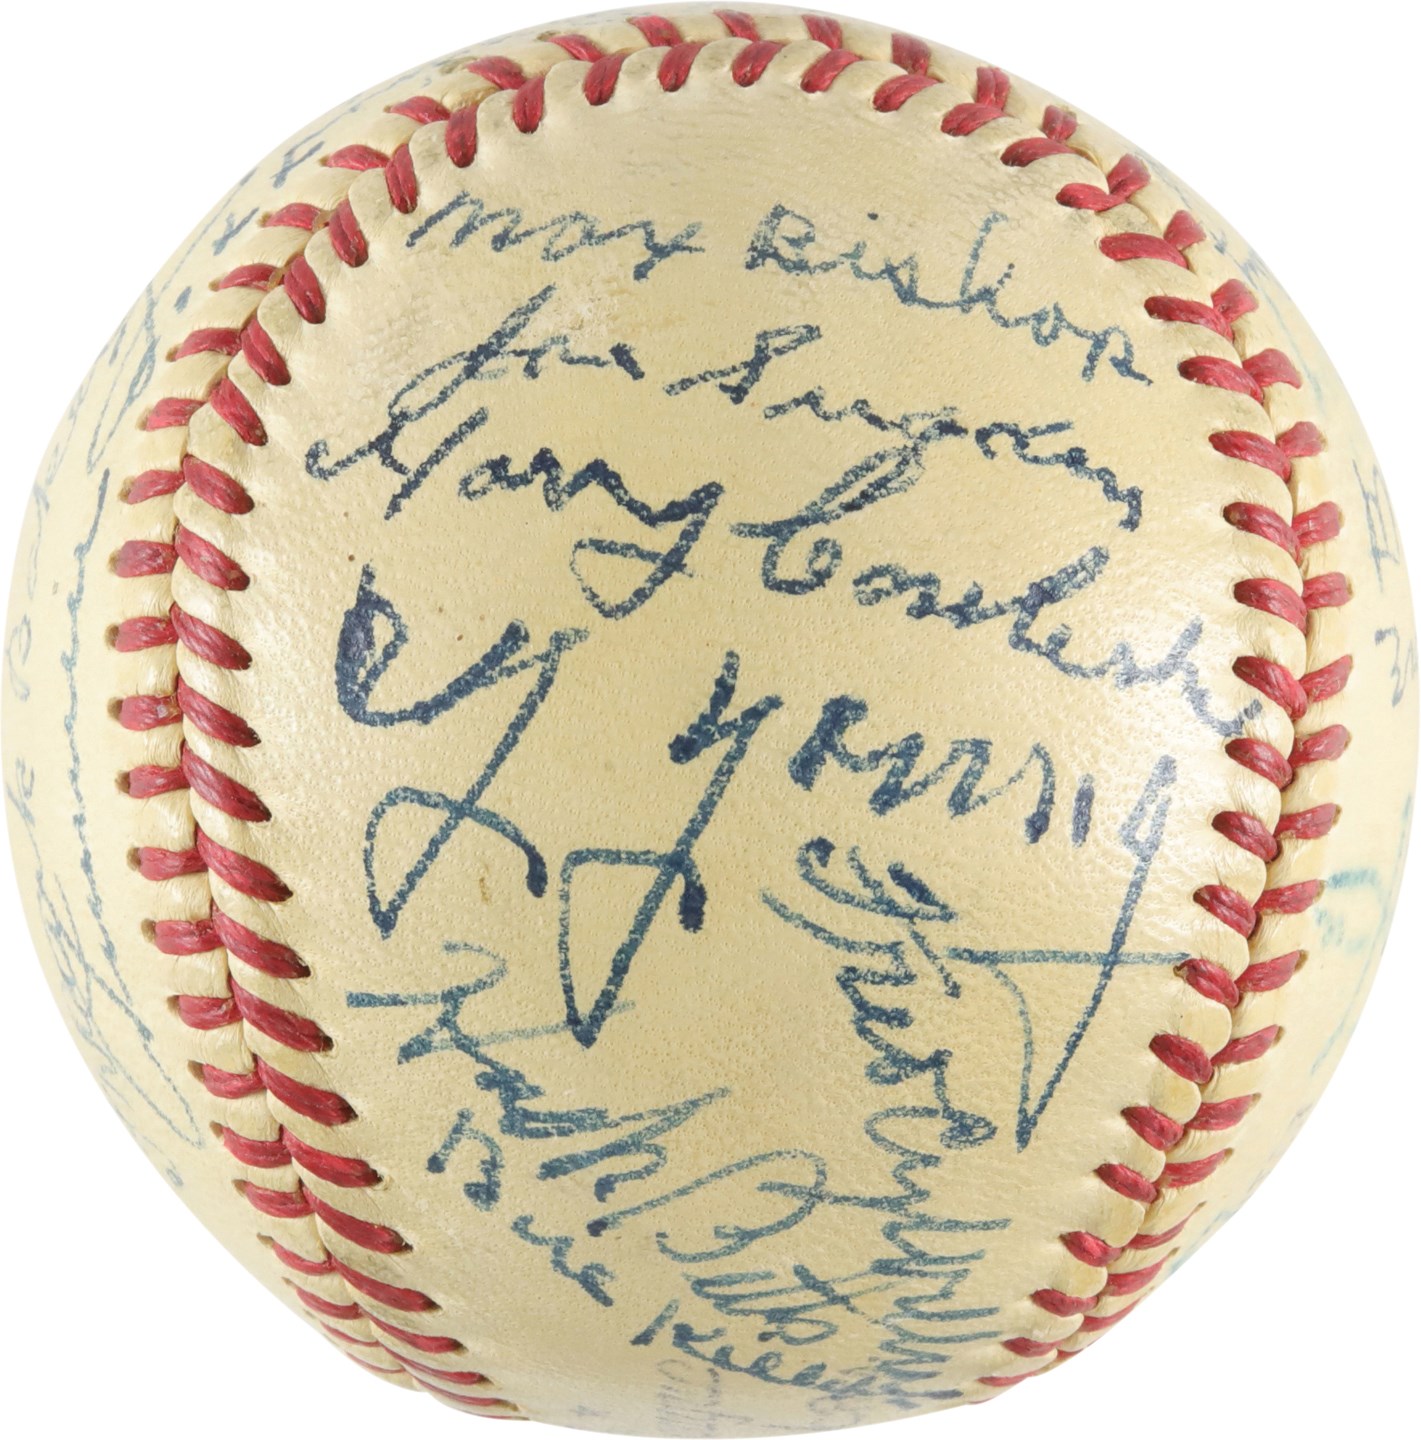 Baseball Autographs - Circa 1950 Old Timers Signed Baseball w/Cy Young, Frank Baker, Jimmie Foxx & Early 19th Century Players (PSA)